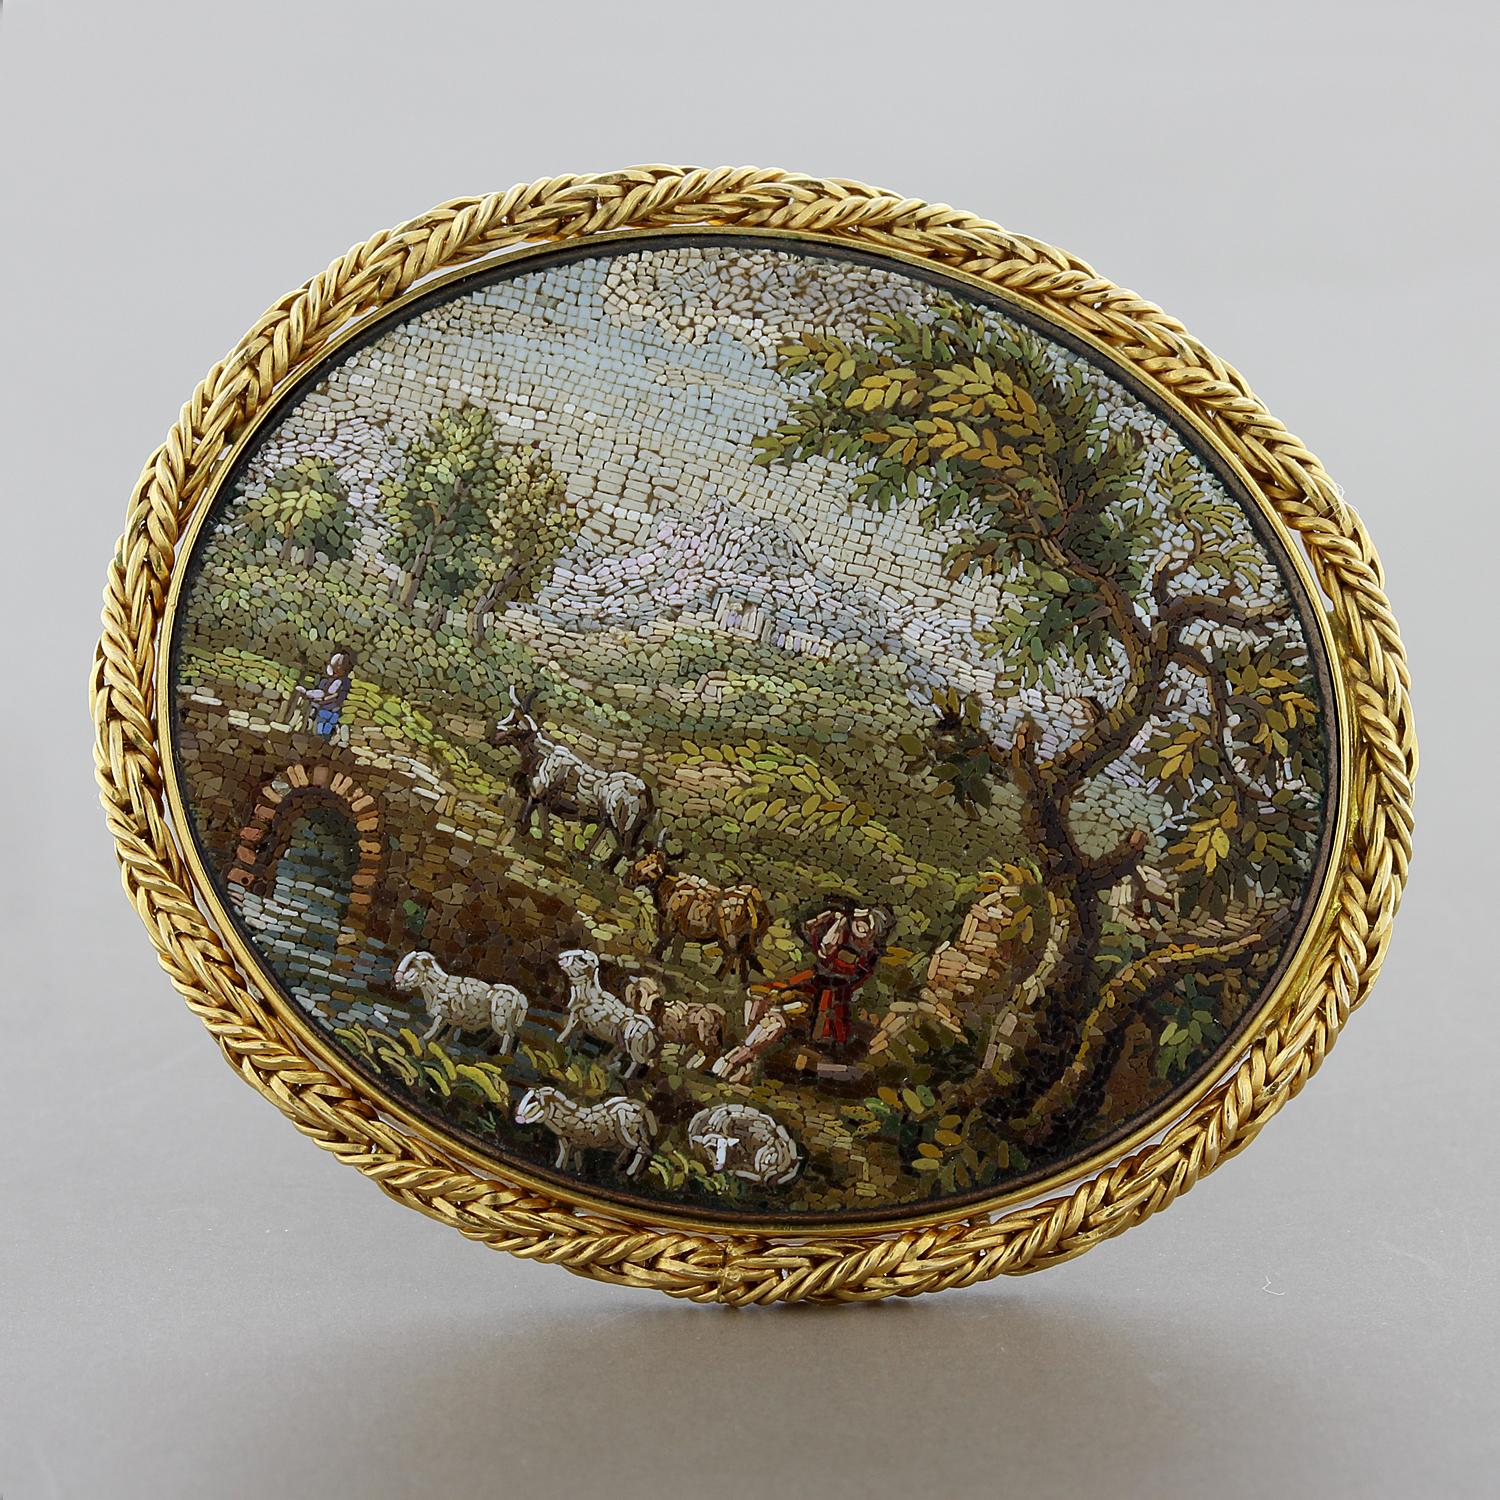 A beautiful realistic landscape painted with nothing but small pieces of marble and stone, this is a high quality micro mosaic made in the Victorian era. It has a lavish woven gold frame enhancing the overall look of the piece. 

Dimensions: 1.95 x